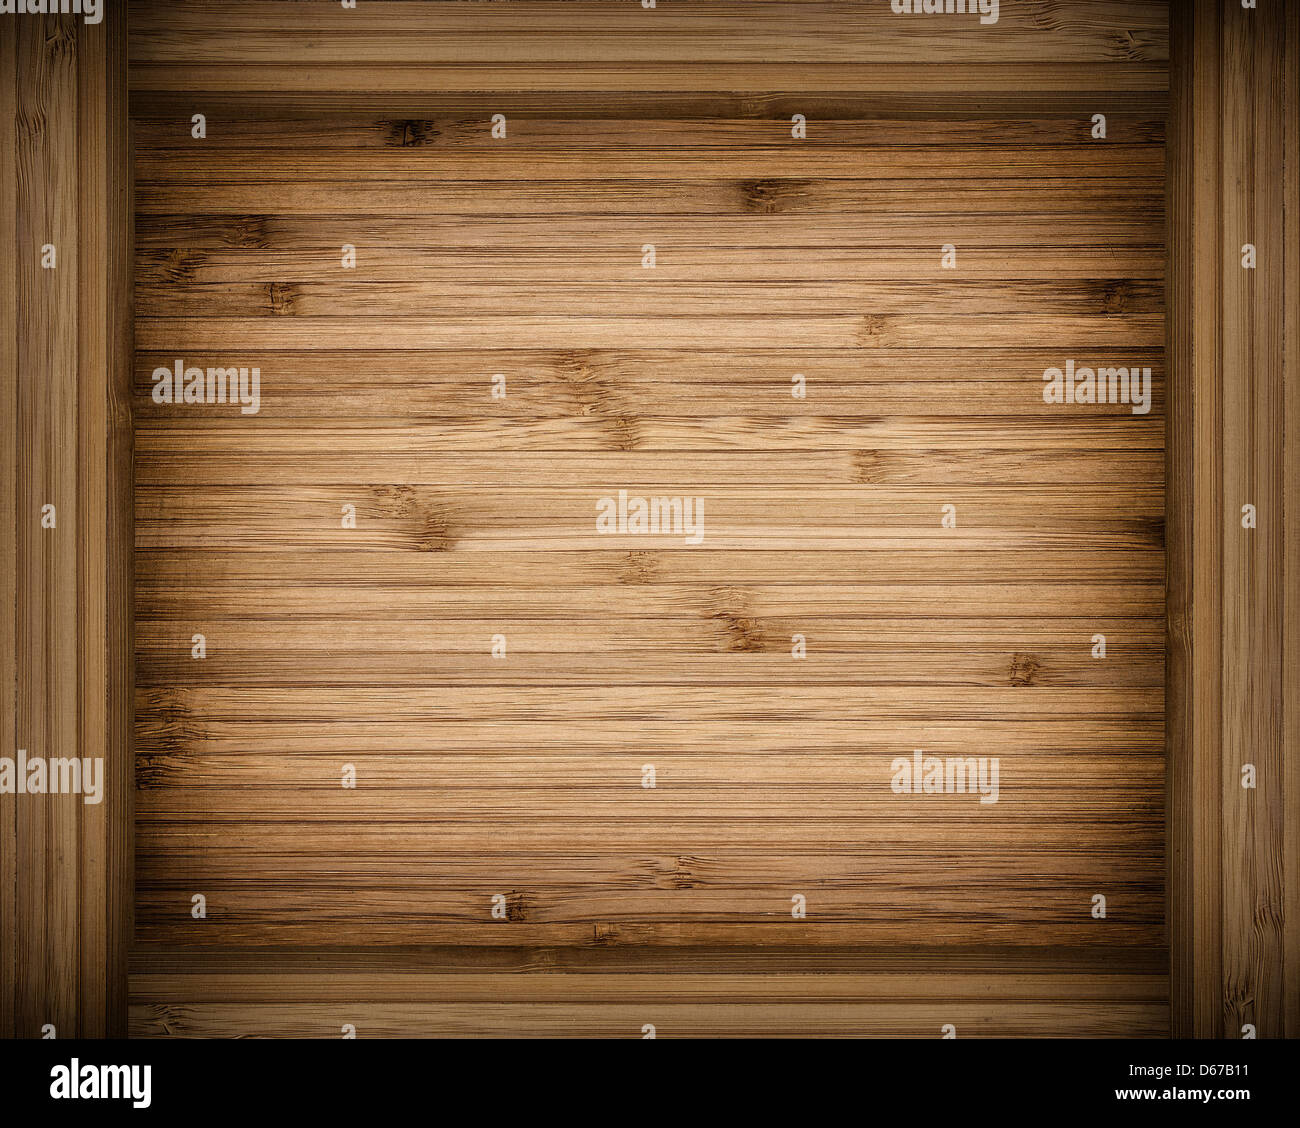 Wooden background with frame Stock Photo